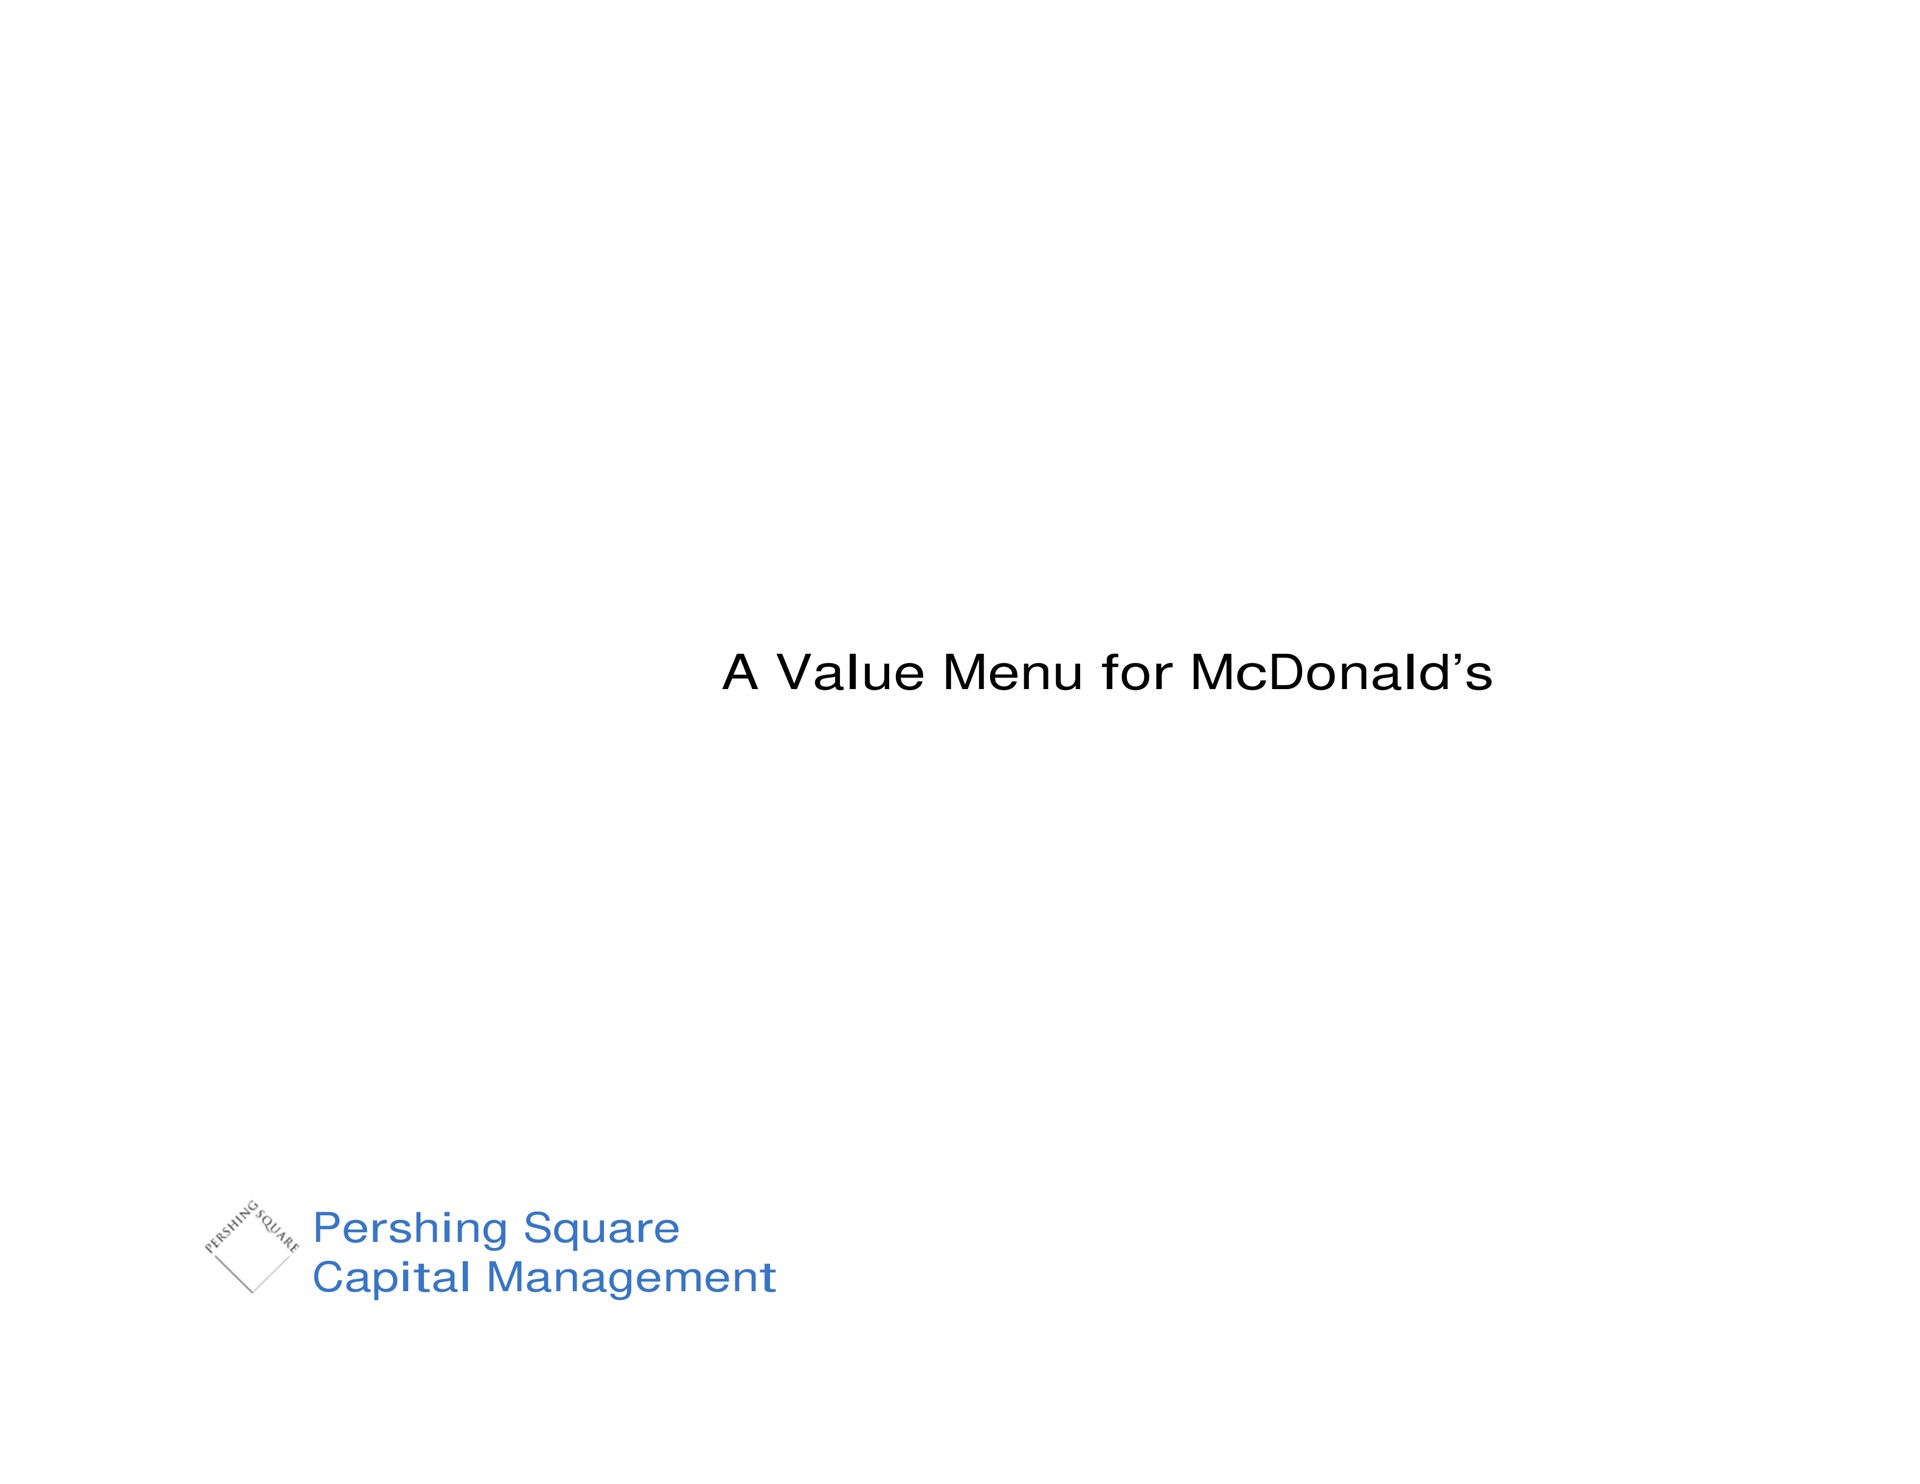 a value menu for square capital management | Pershing Square